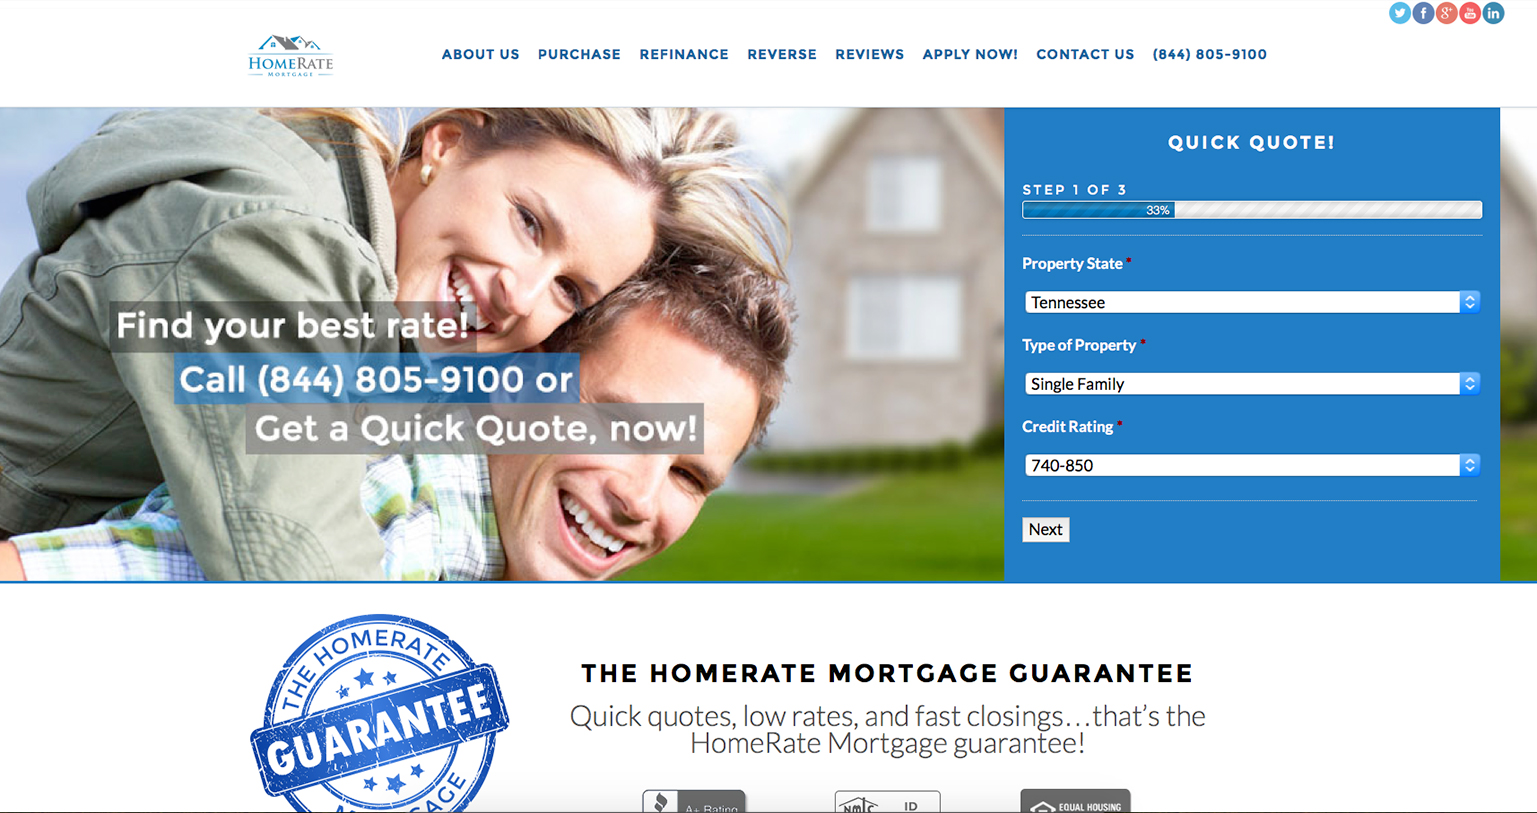 HomeRate Mortgage